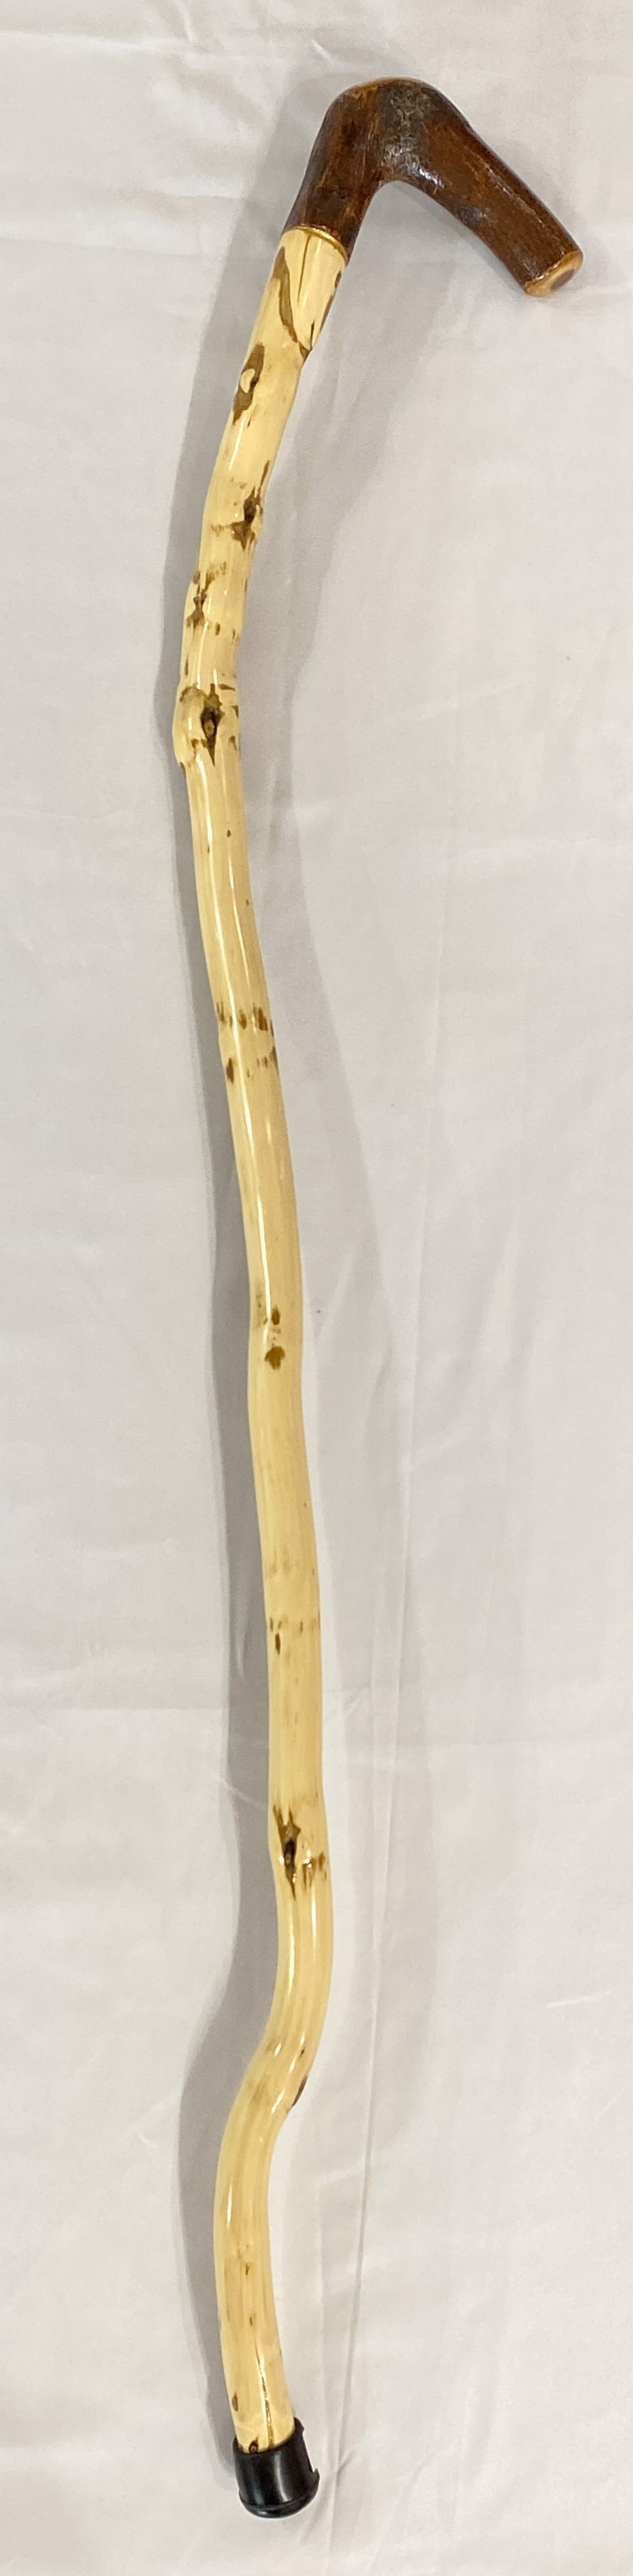 Wooden Walking Stick #4 by Kevin Foote